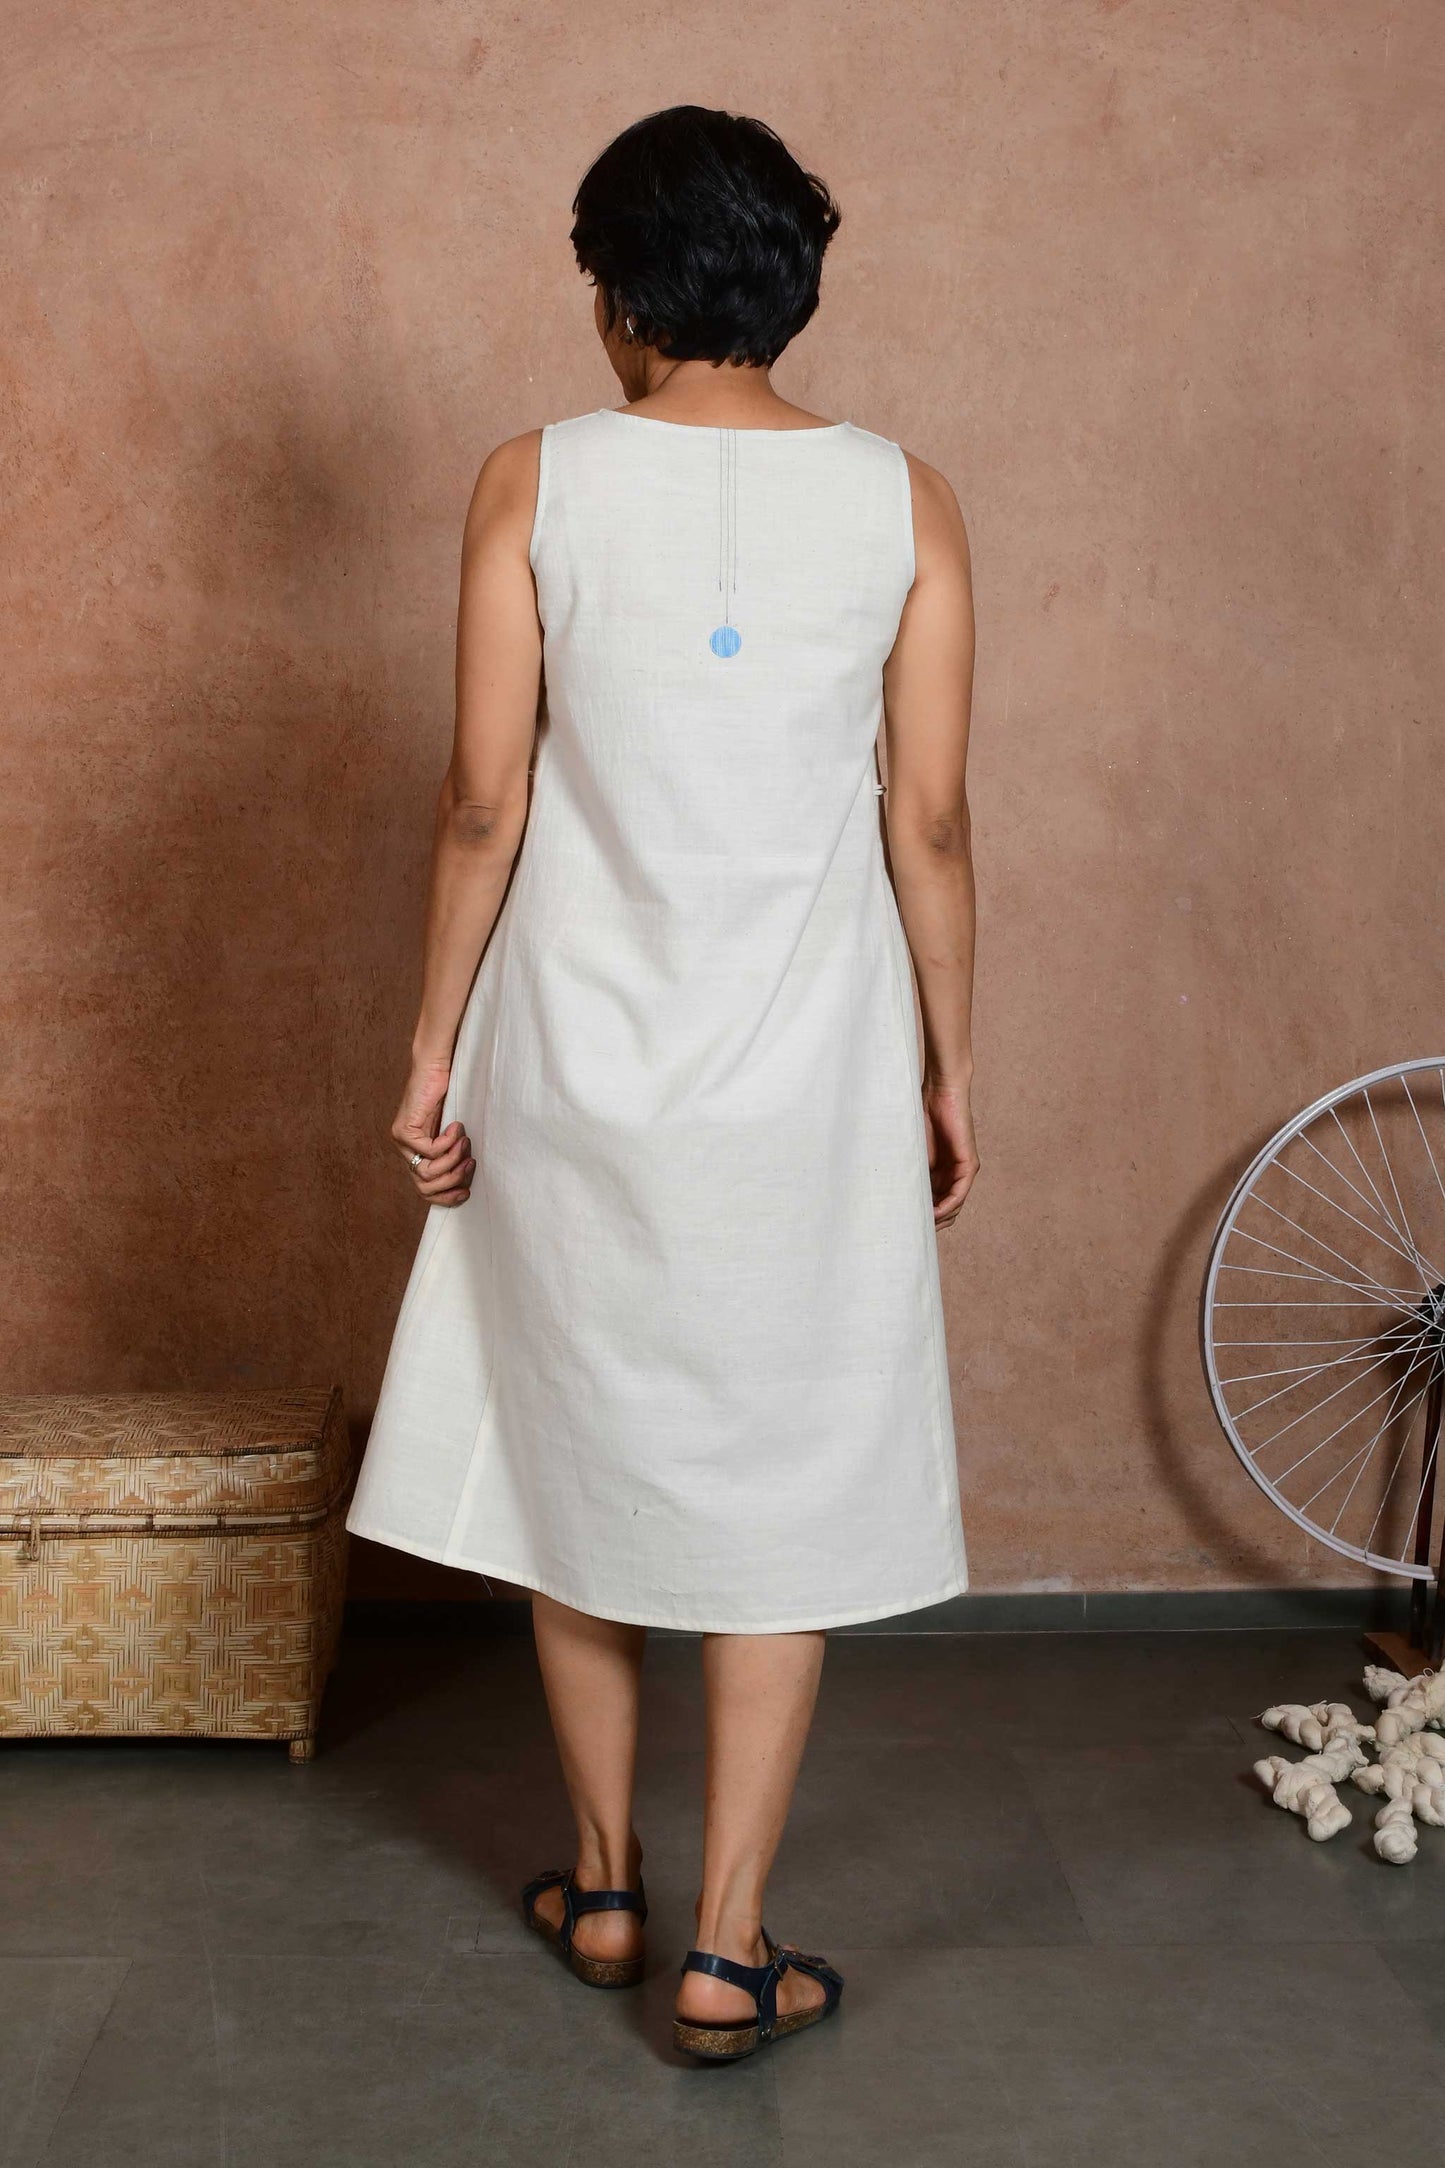 Back pose of a middle aged woman wearing a knee length off white dress made of handspun and handloom cotton fabric with a stitch detail and a small circular patch on the centre back of the neck.